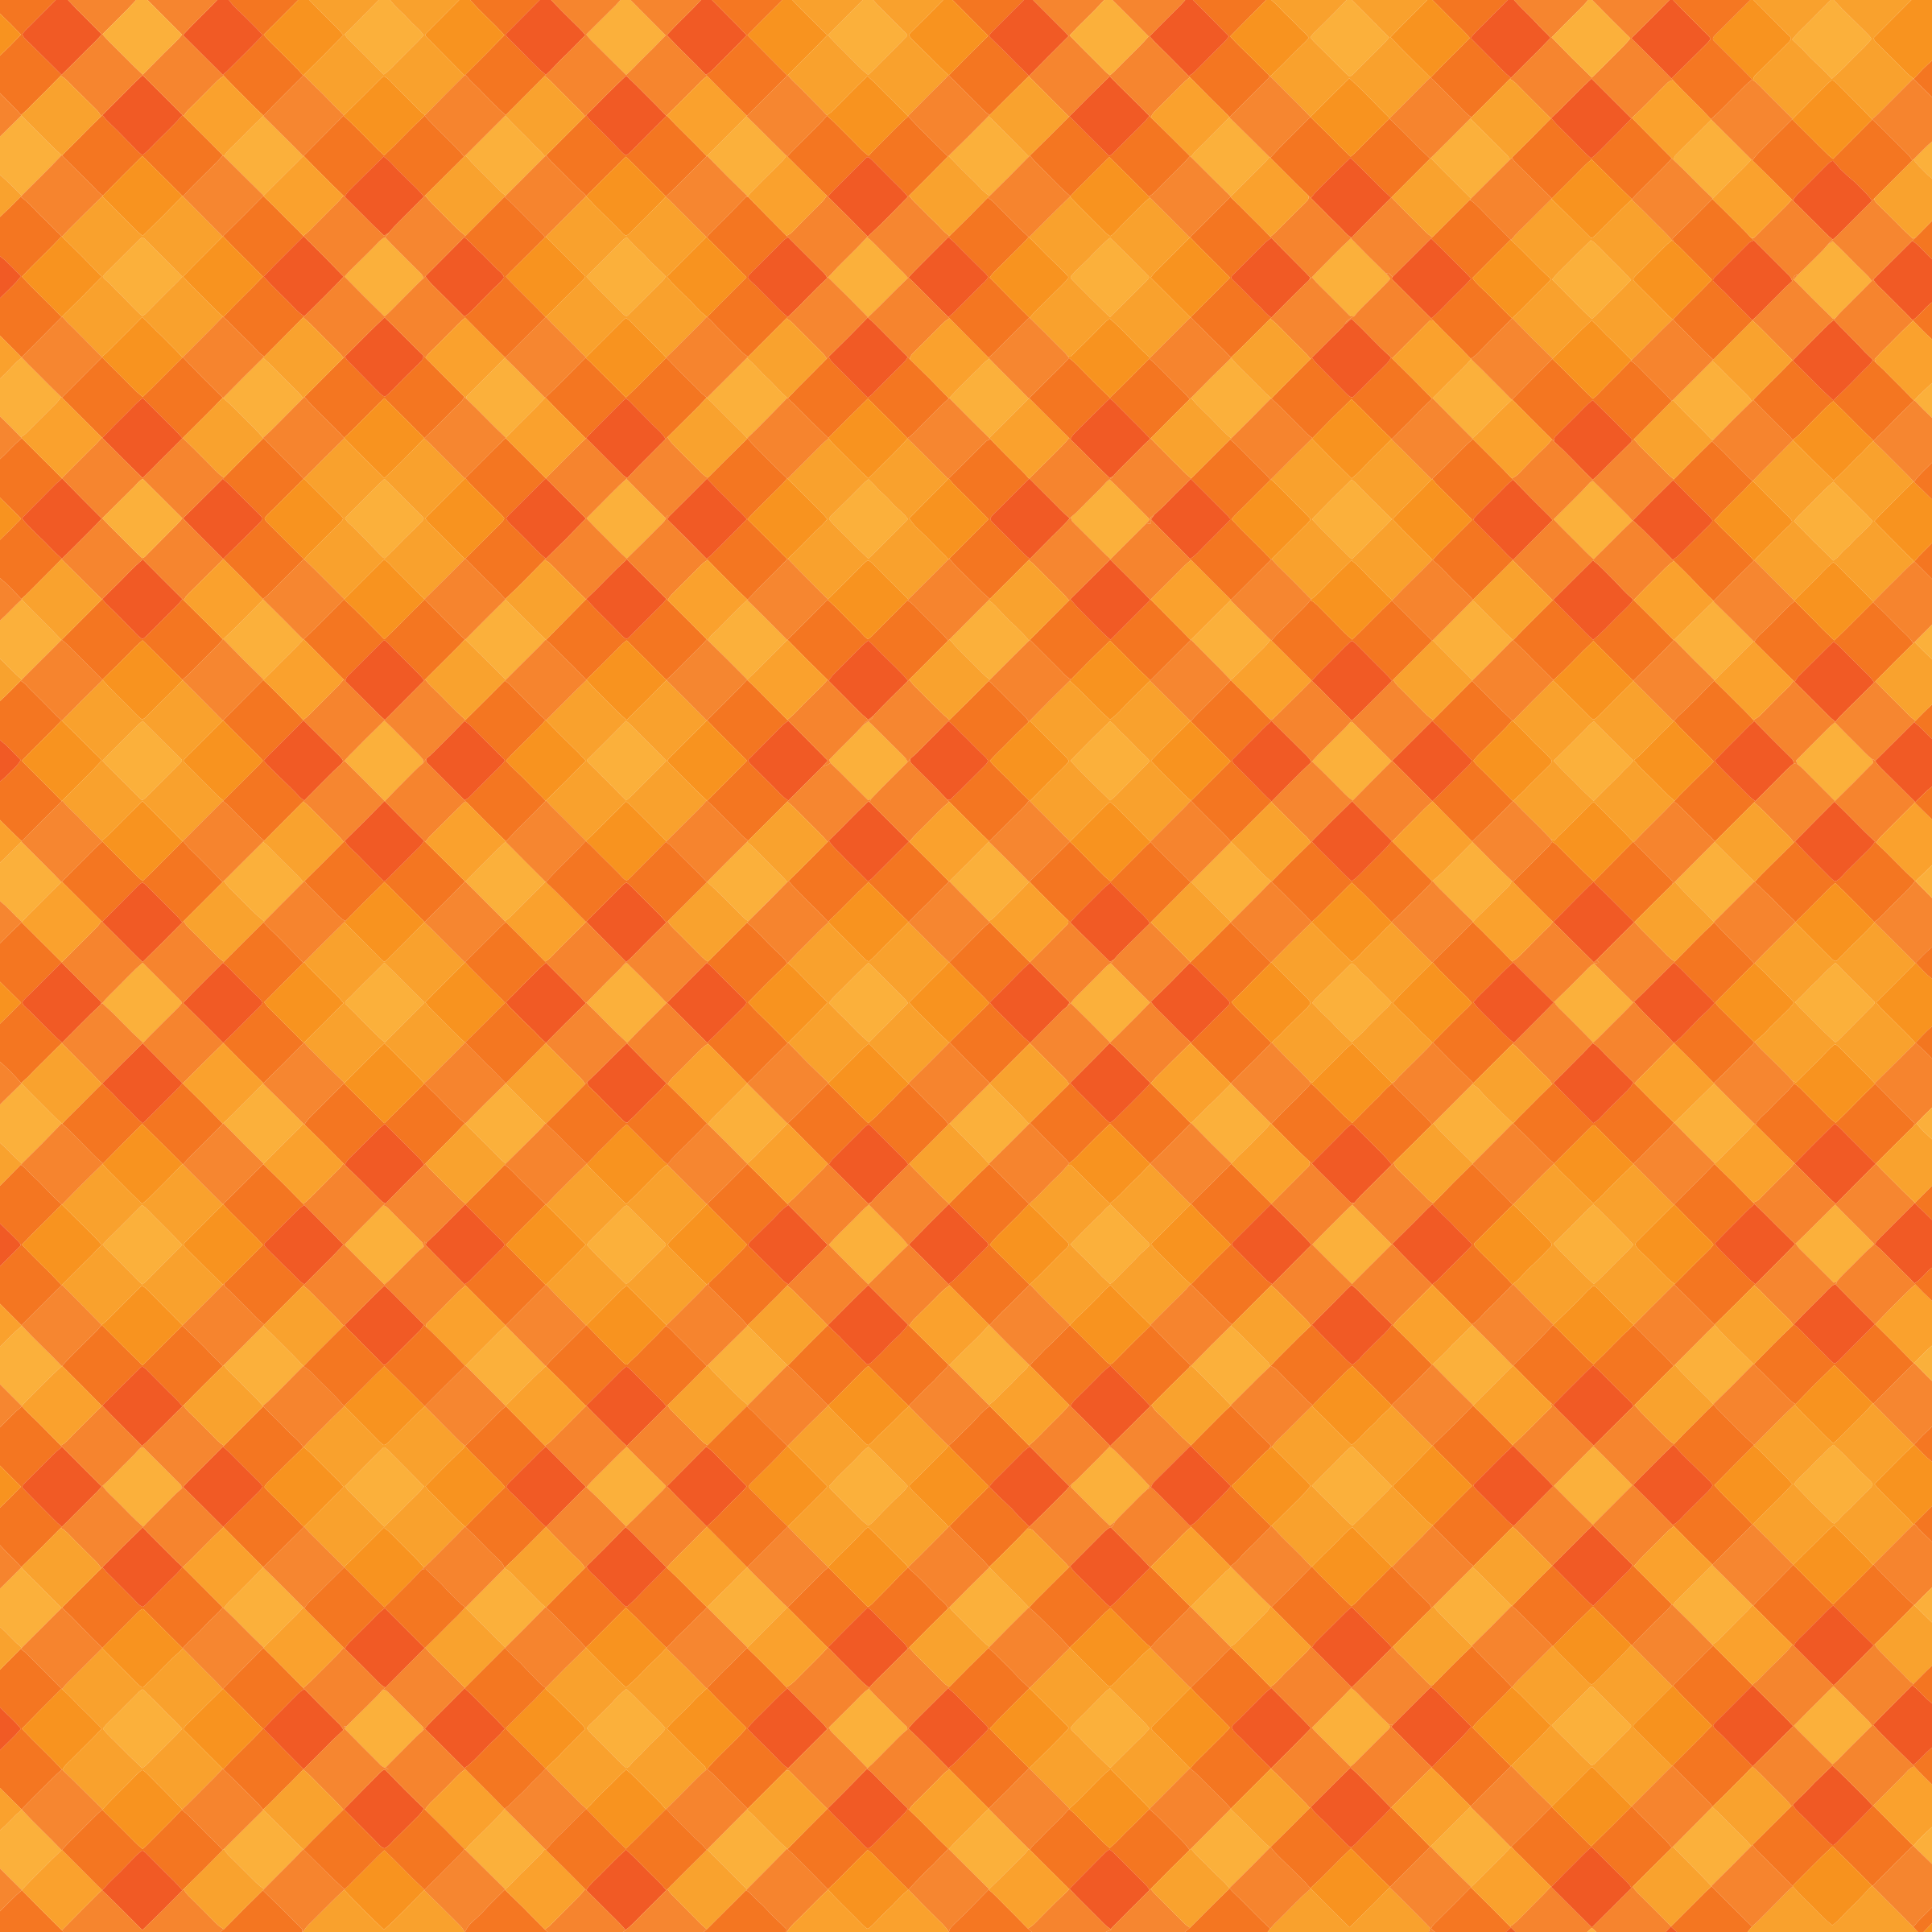 Checkered background clipart - Clipground